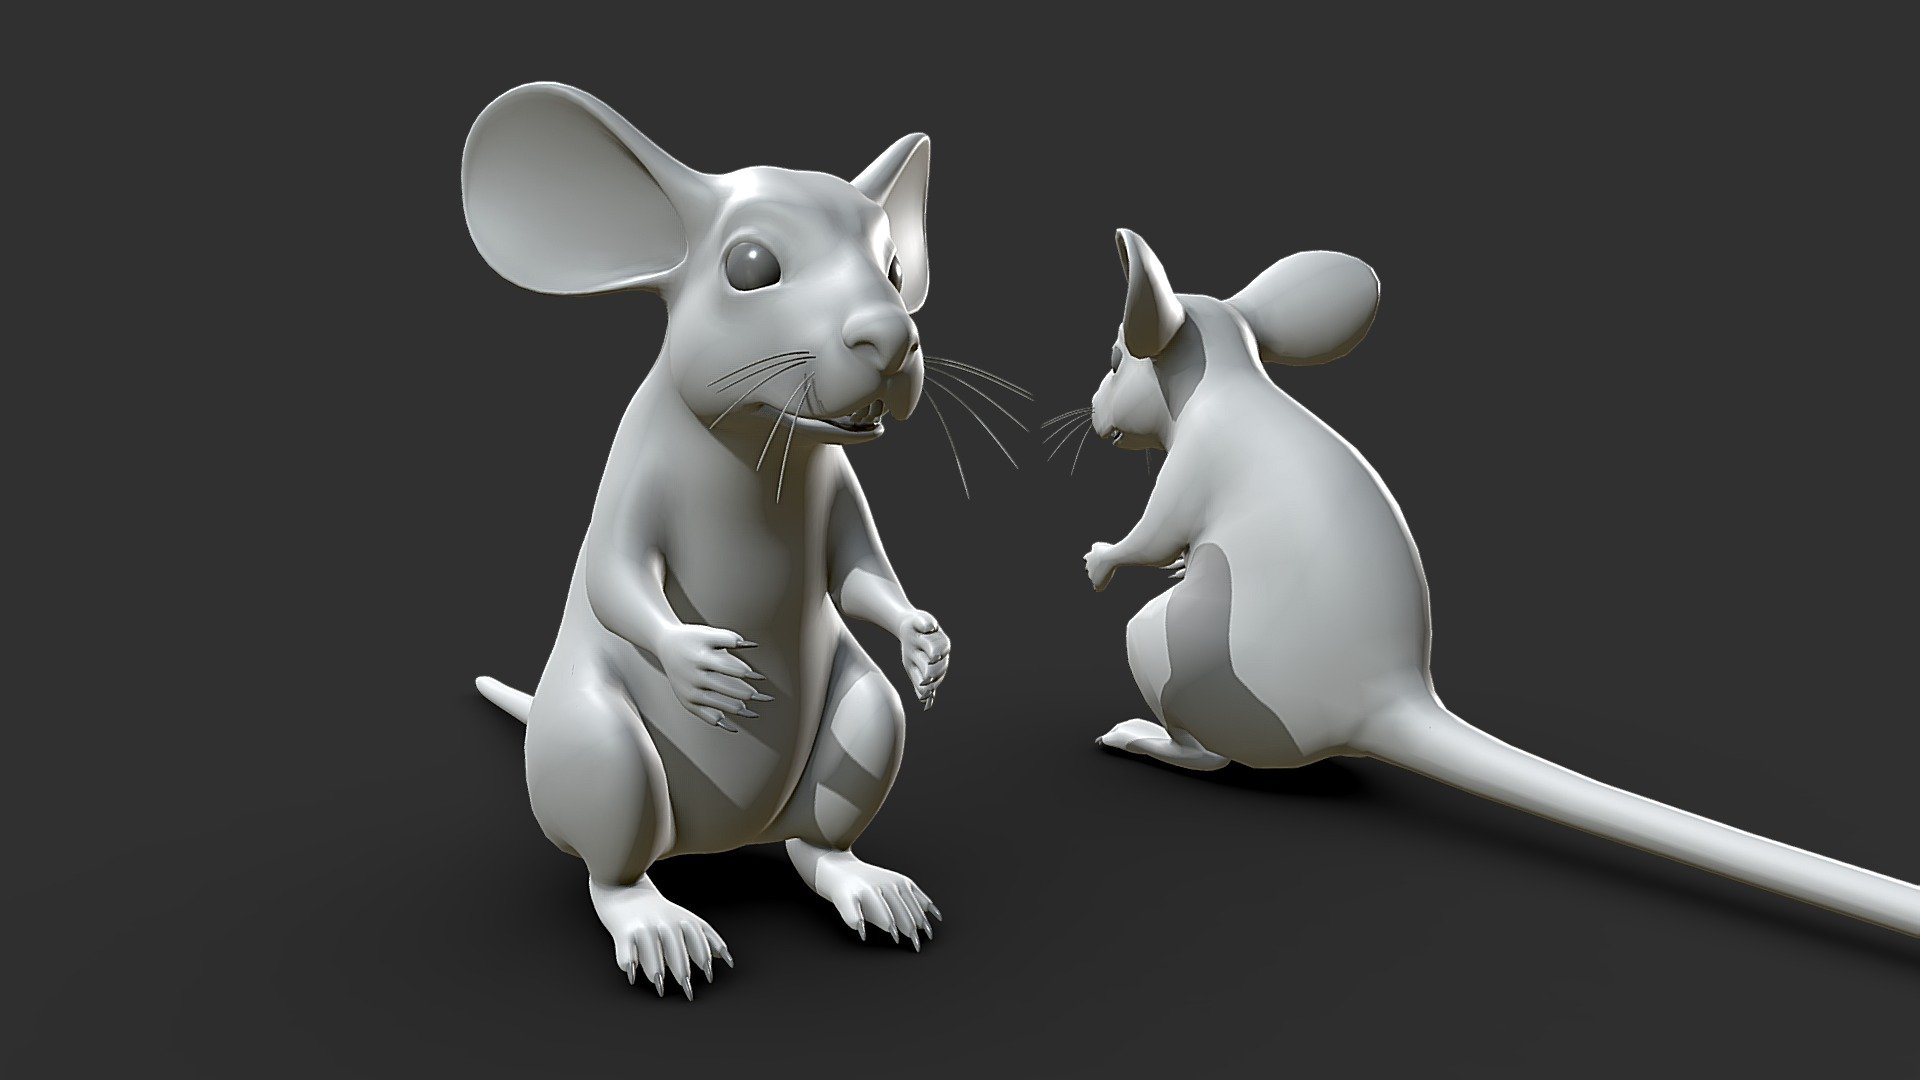 Click the link to get the model:


https://www.artstation.com/a/29852188
Mouse BaseMesh model done in maya with proper mesh flow and Uv unwrap is done with no over lapping.

File format:





Obj




Fbx




Maya file




Blender file



Inside the product:





clean topology




Single Udim




unwrapped Uvs for texturing




no overlapping UVs




proper naming and grouping




no unwanted shaders and history.



You May also like:


👉 https://skfb.ly/oQ9oN 👈
 - Mouse BaseMesh - Topology + UV Map - Buy Royalty Free 3D model by Tashi59 (@tsering) 3d model